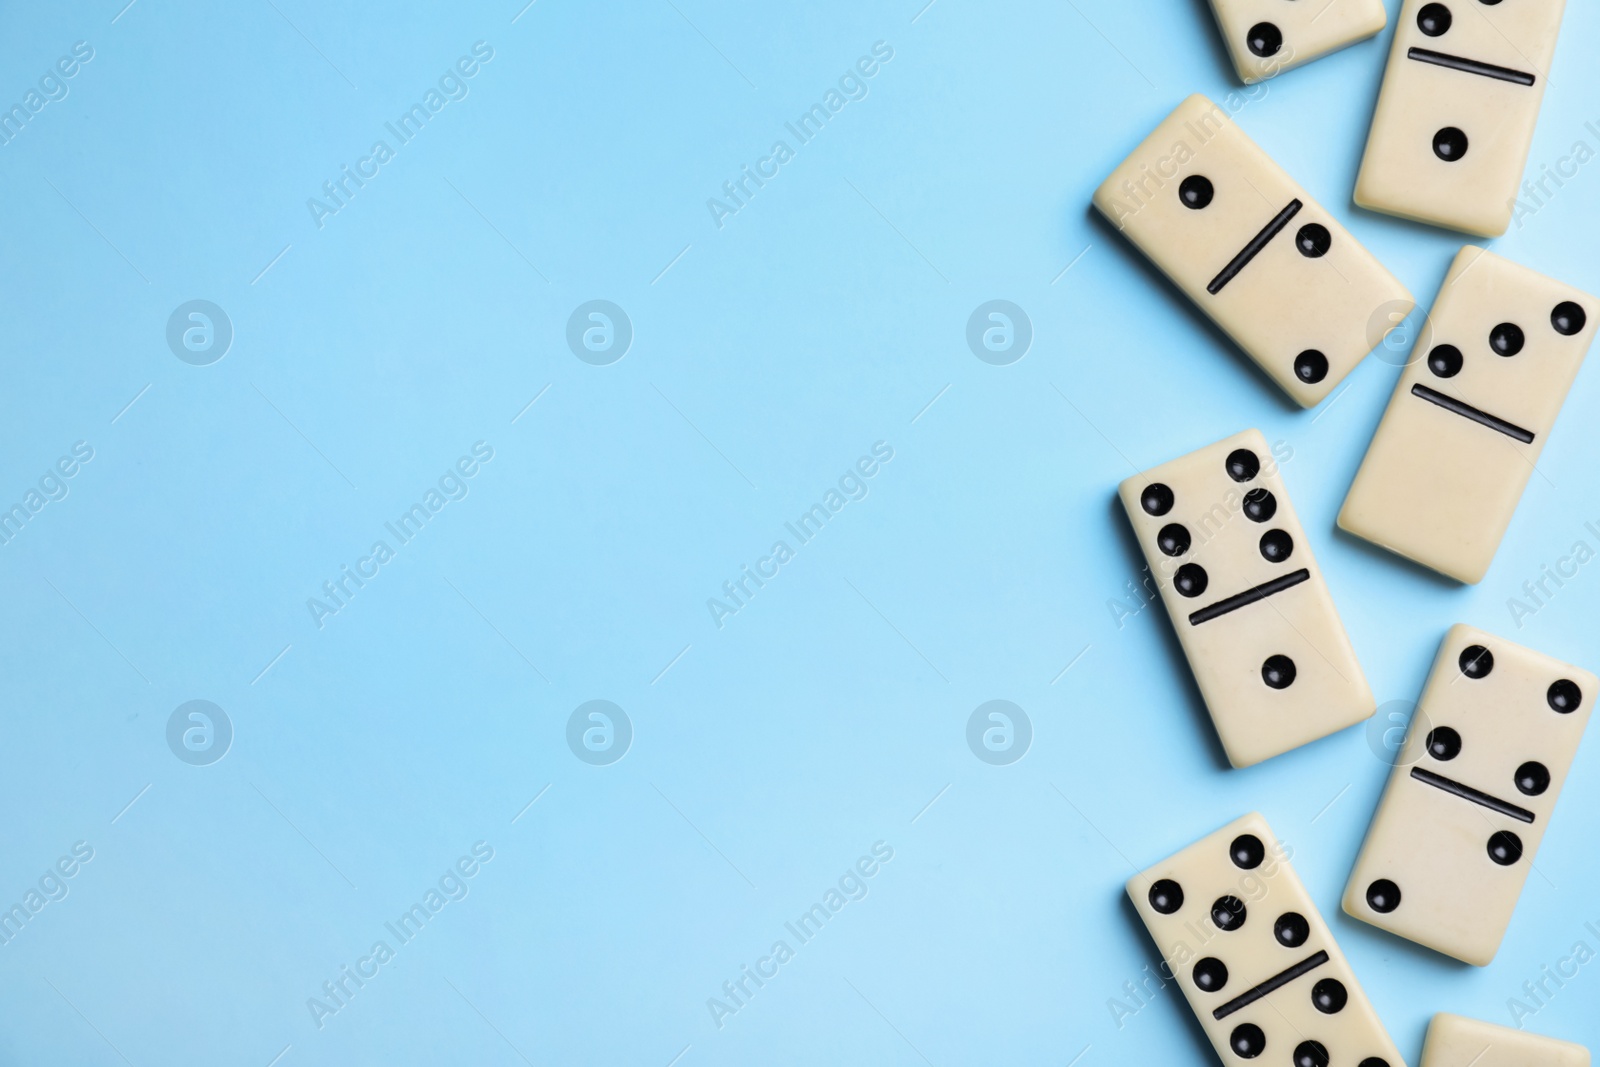 Photo of Classic domino tiles on light blue background, flat lay. Space for text